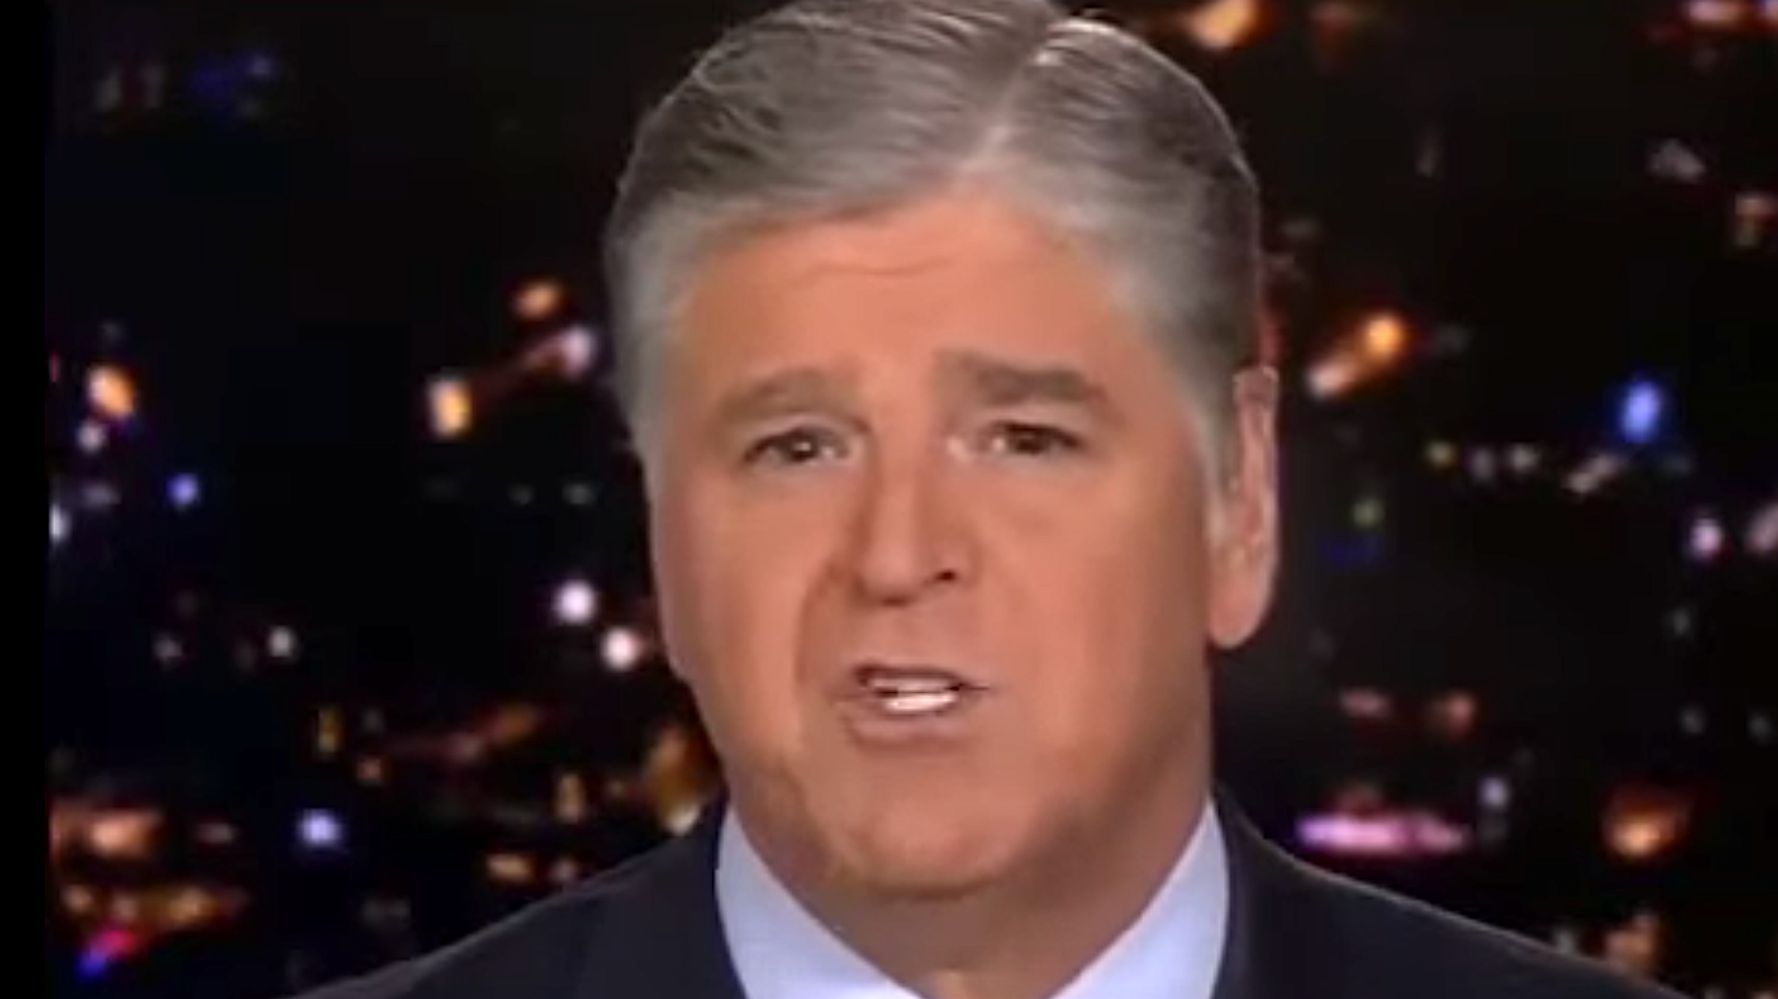 Sean Hannity's Diatribe At Victorious Democrats Turns Into Stunning Self-Own